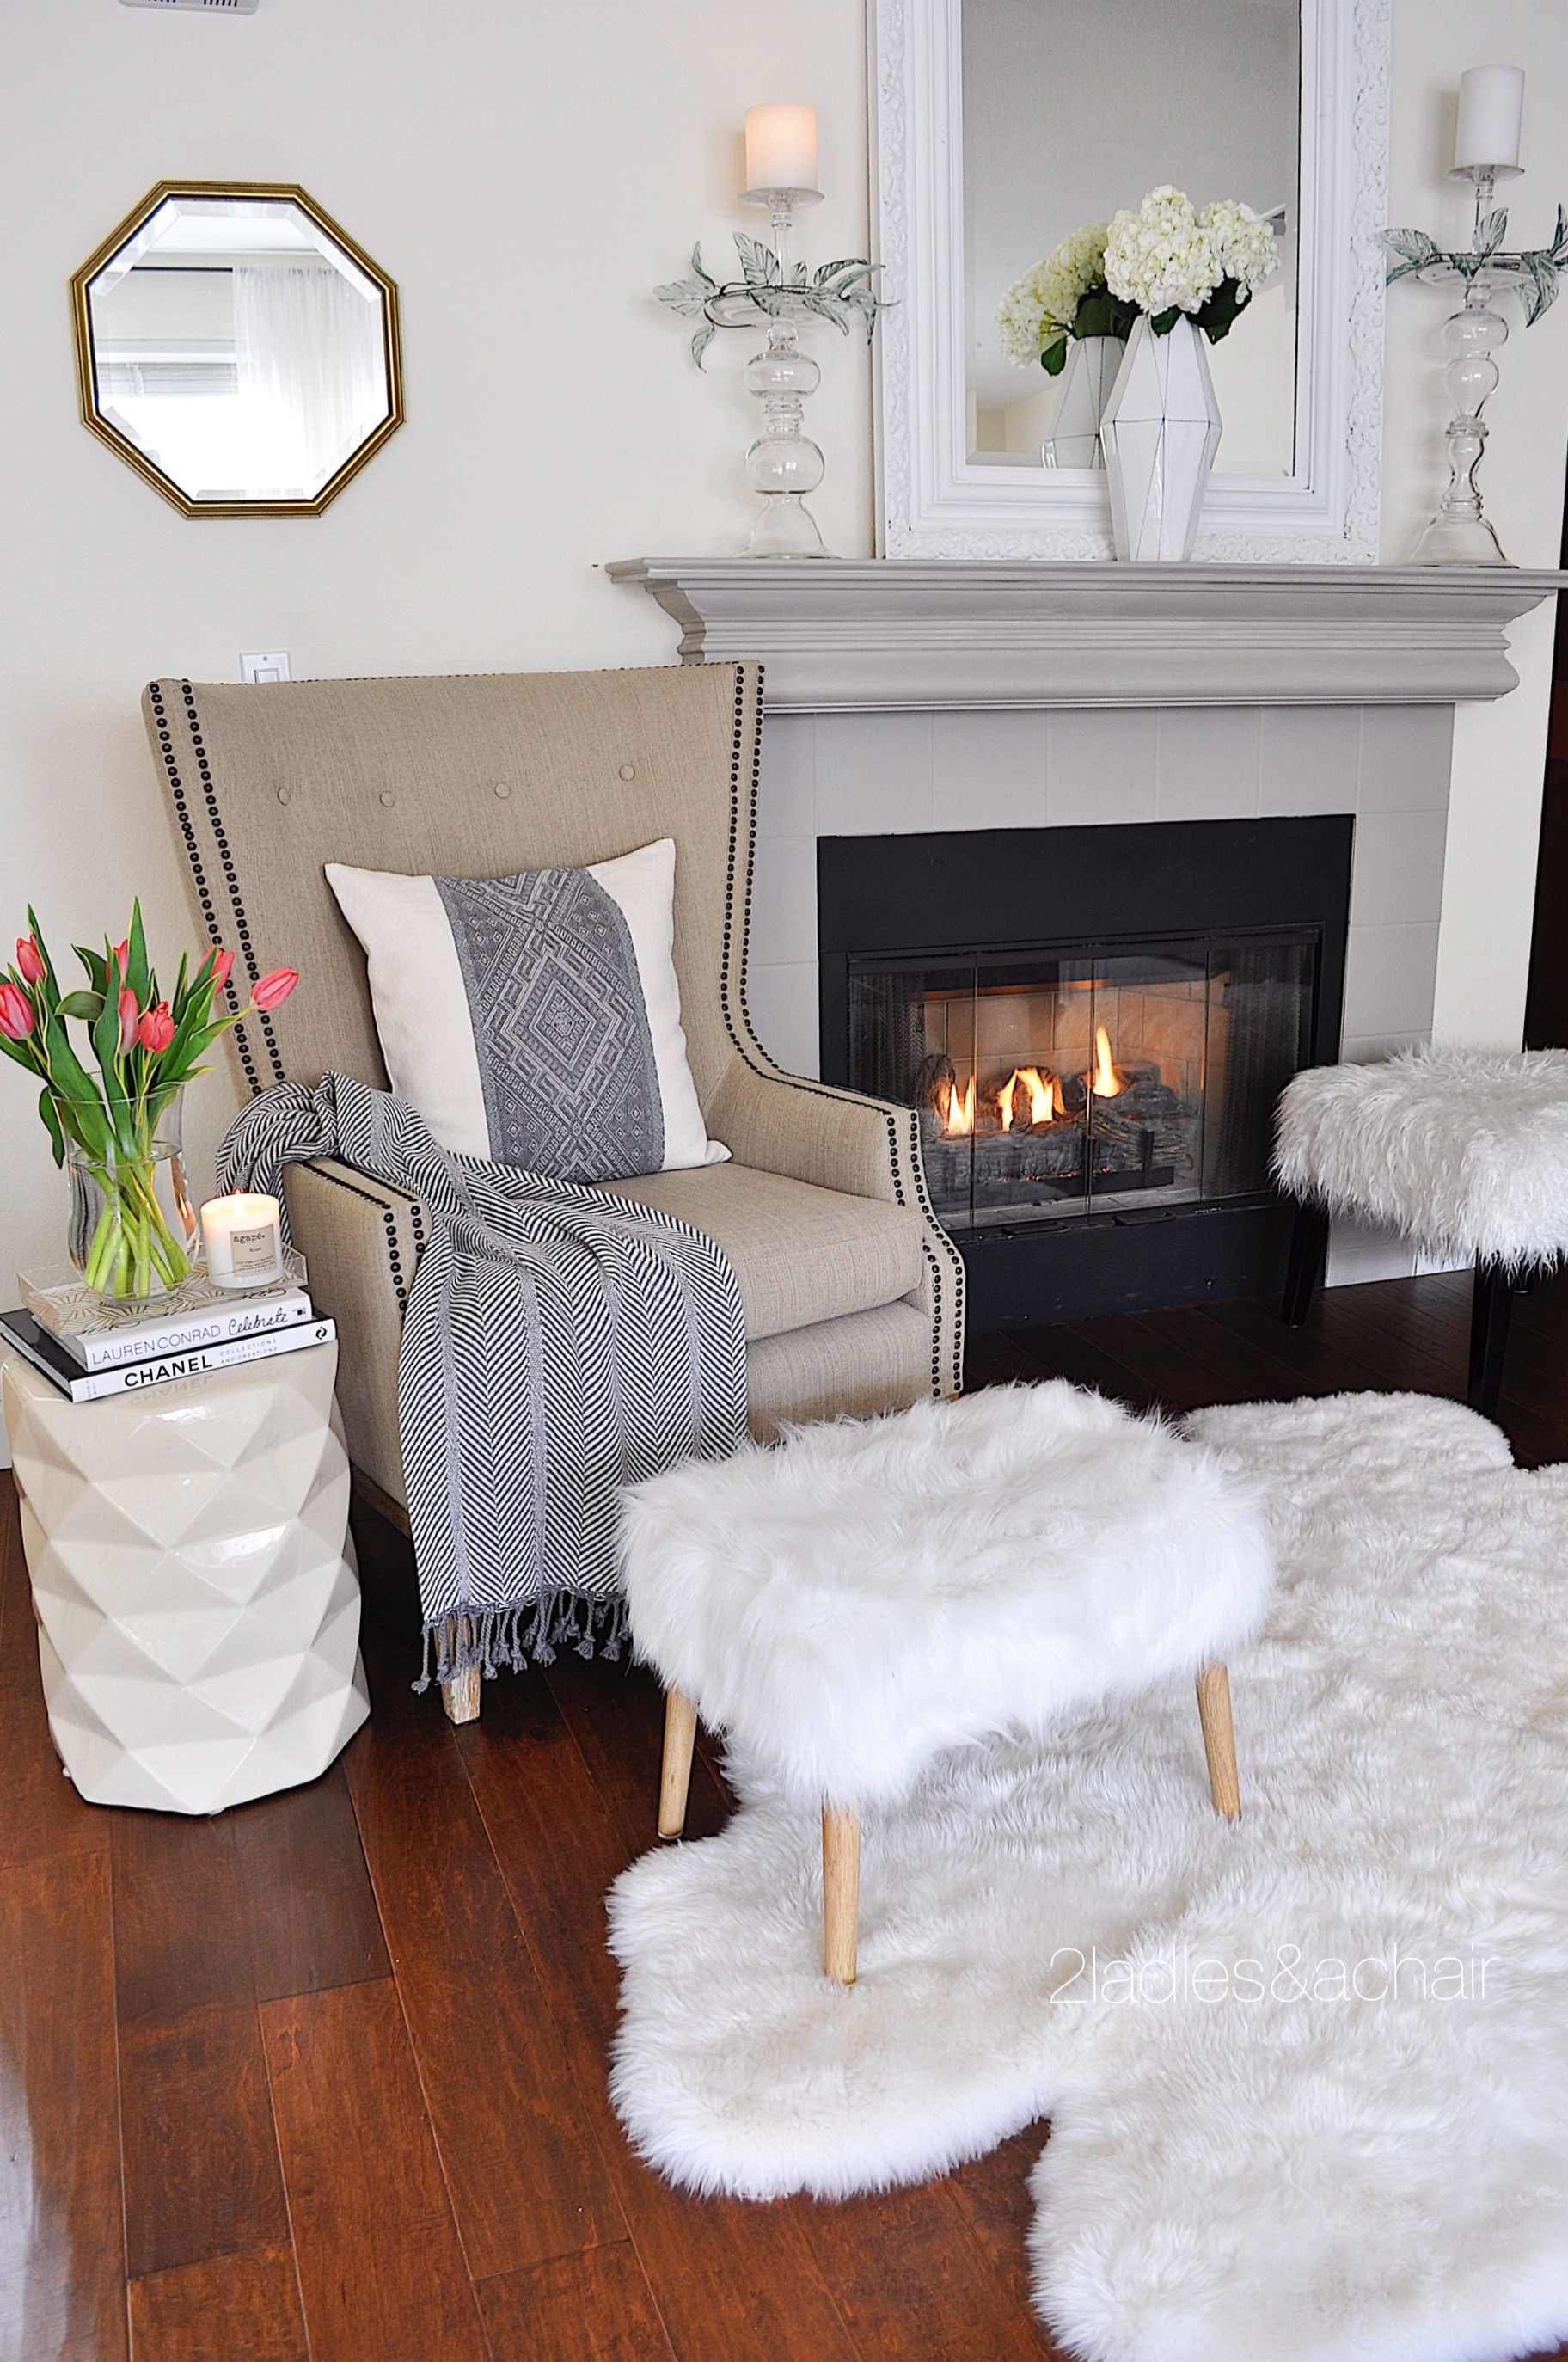 Spring Decorating Ideas to Refresh Your Favorite Chair — 2 Ladies & A Chair